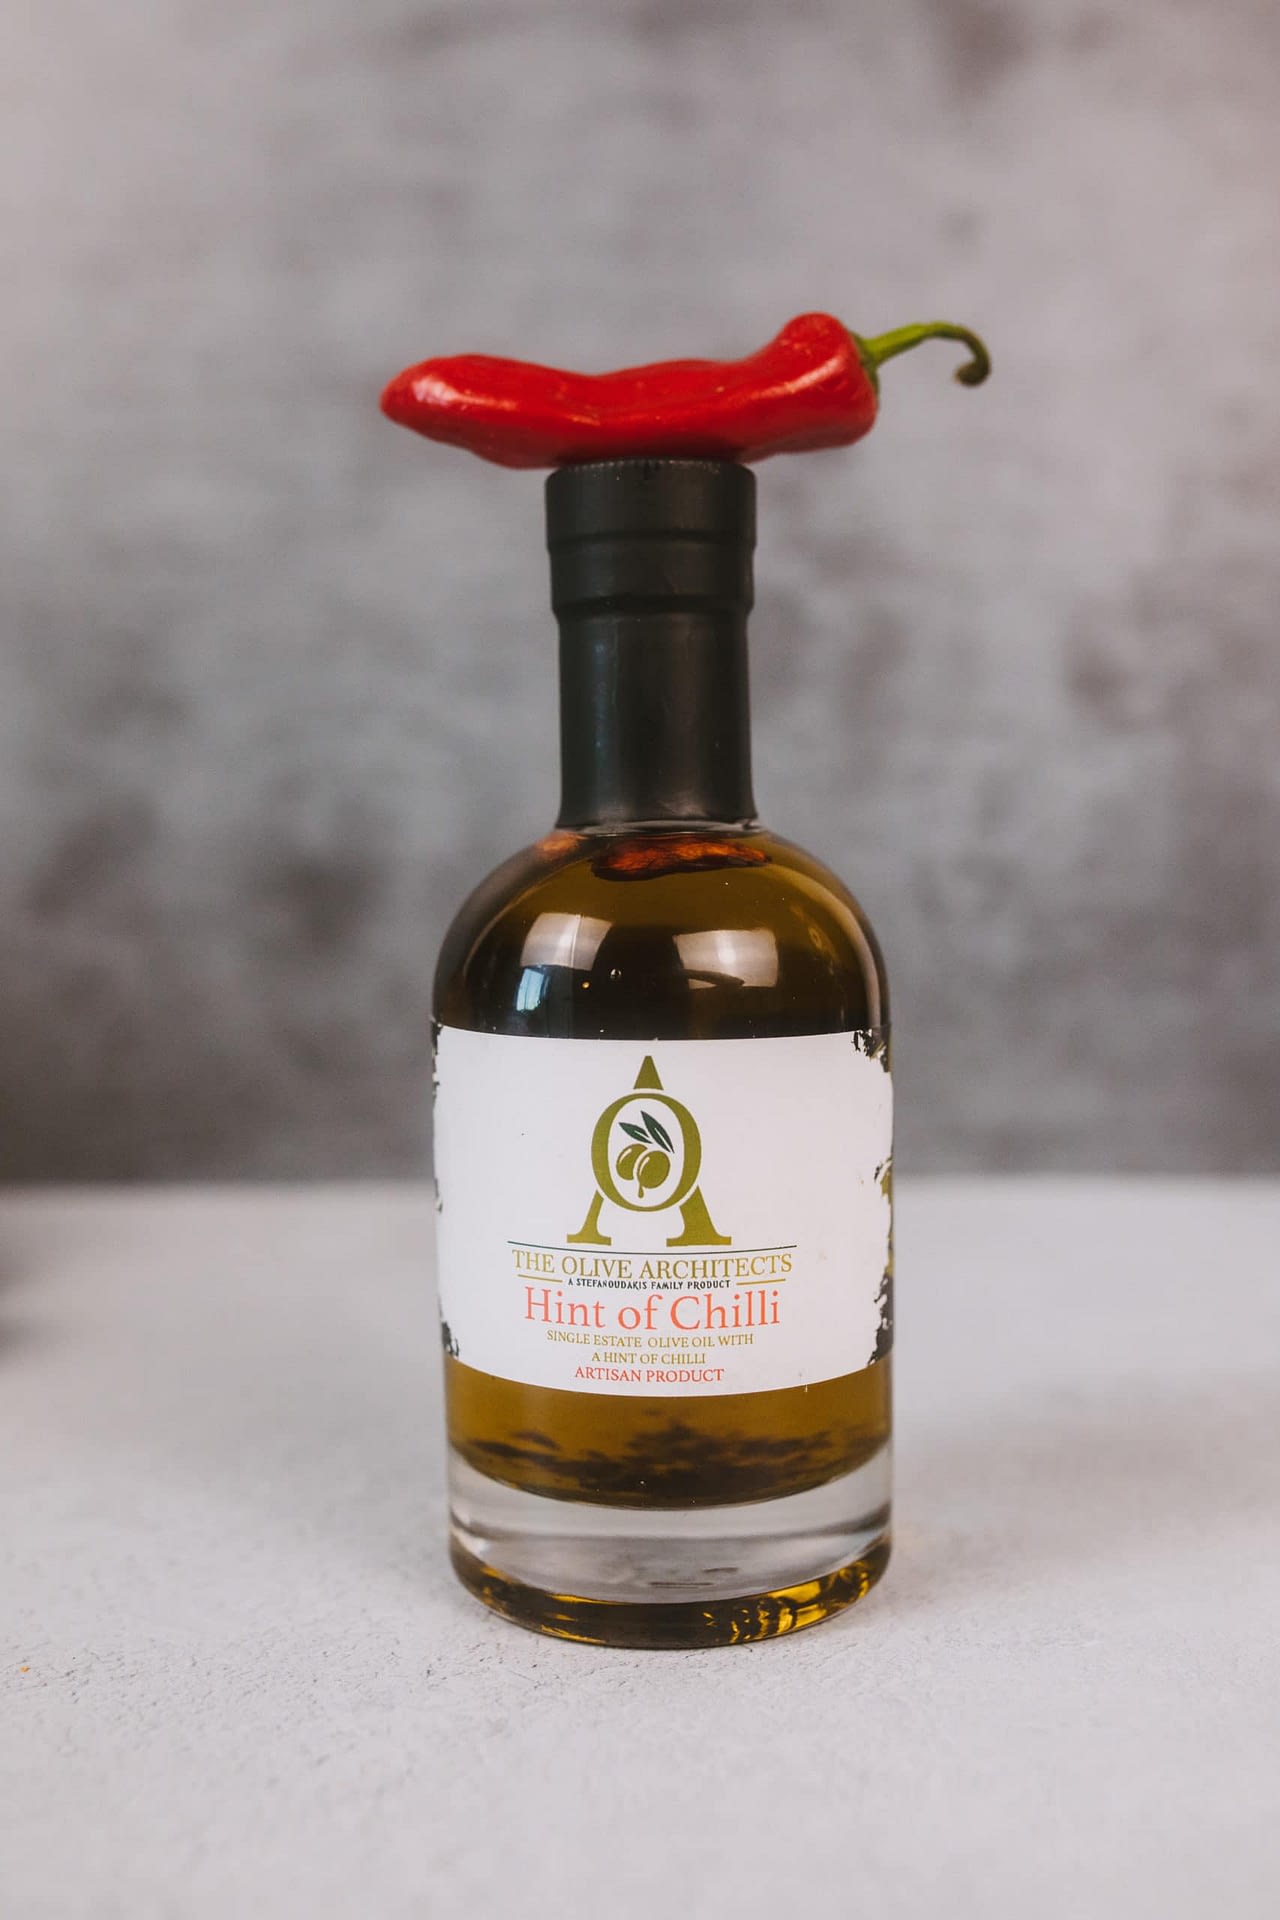 Hint of chilli extra virgin olive oil